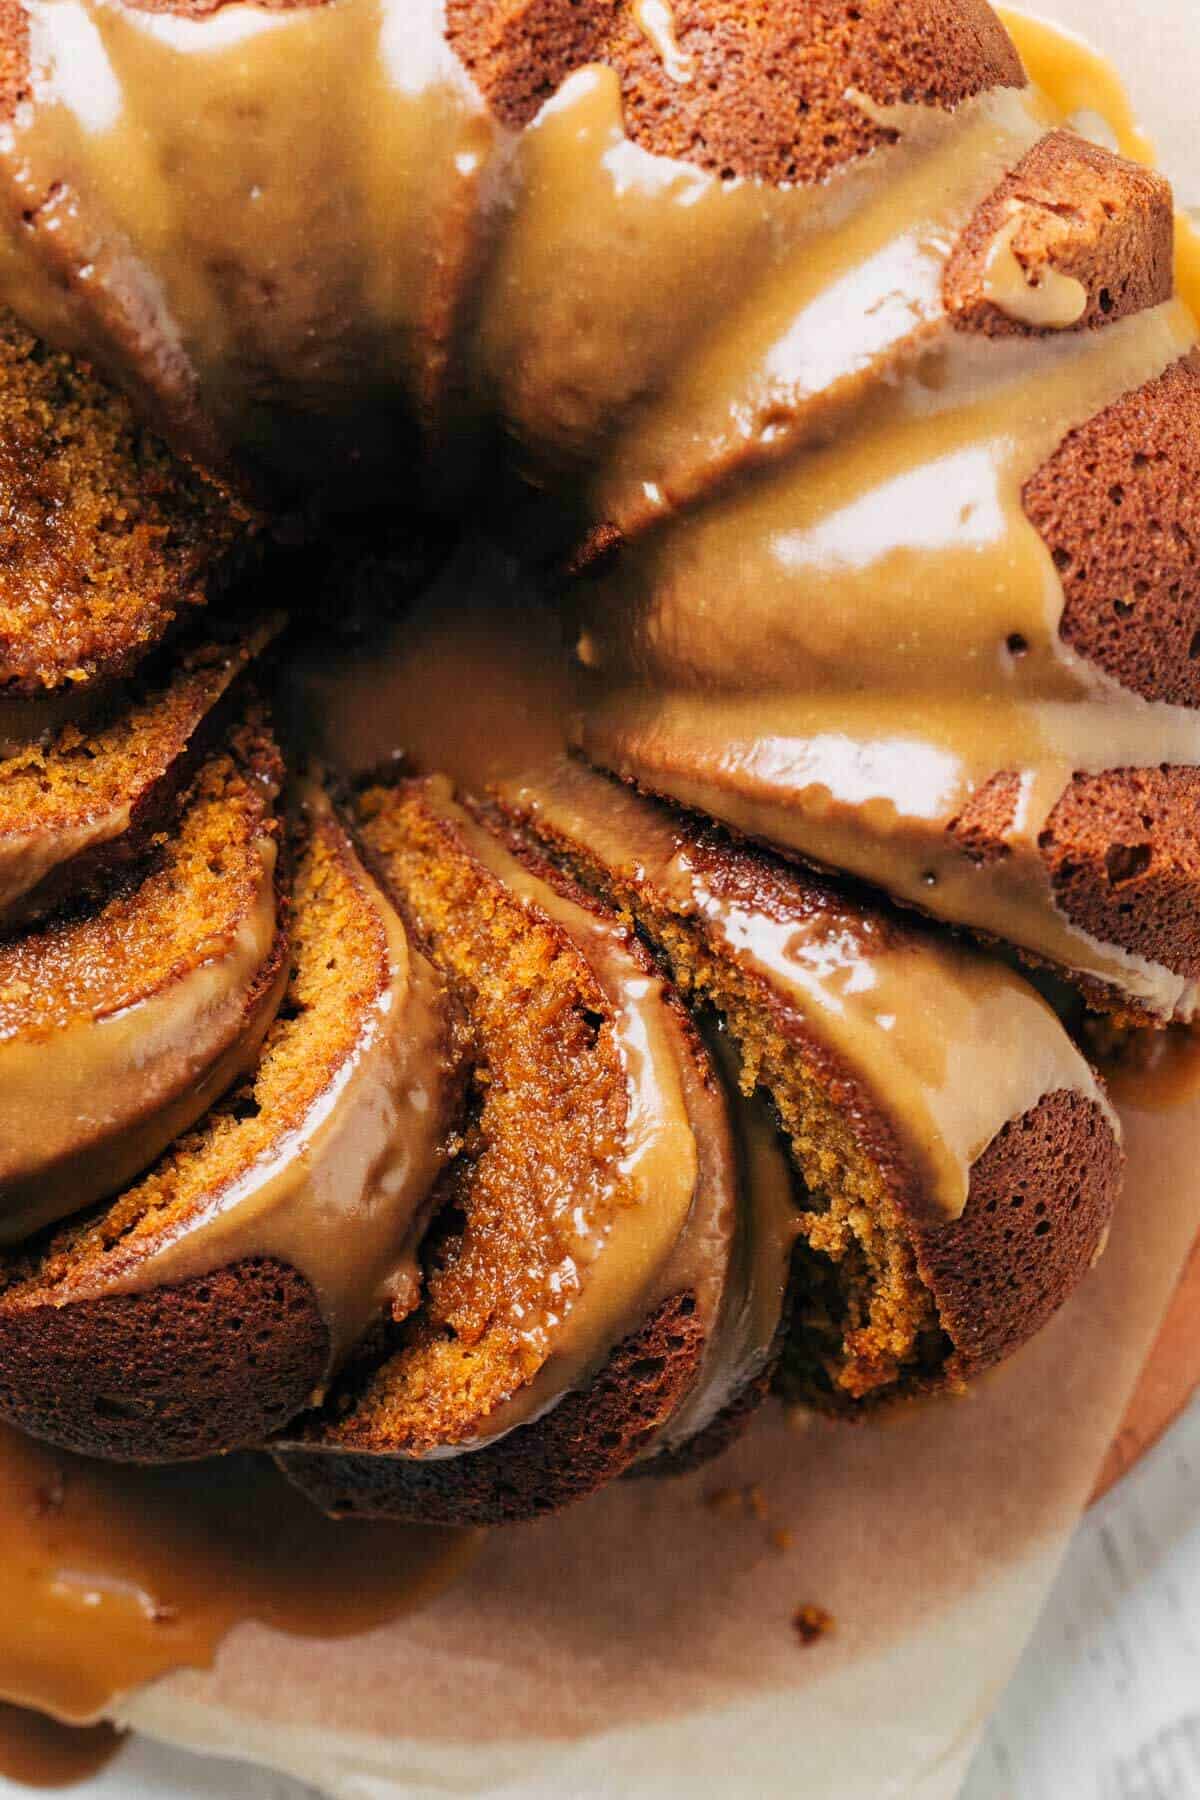 What To Do If Your Cake Won't Come Out Of The Bundt Pan